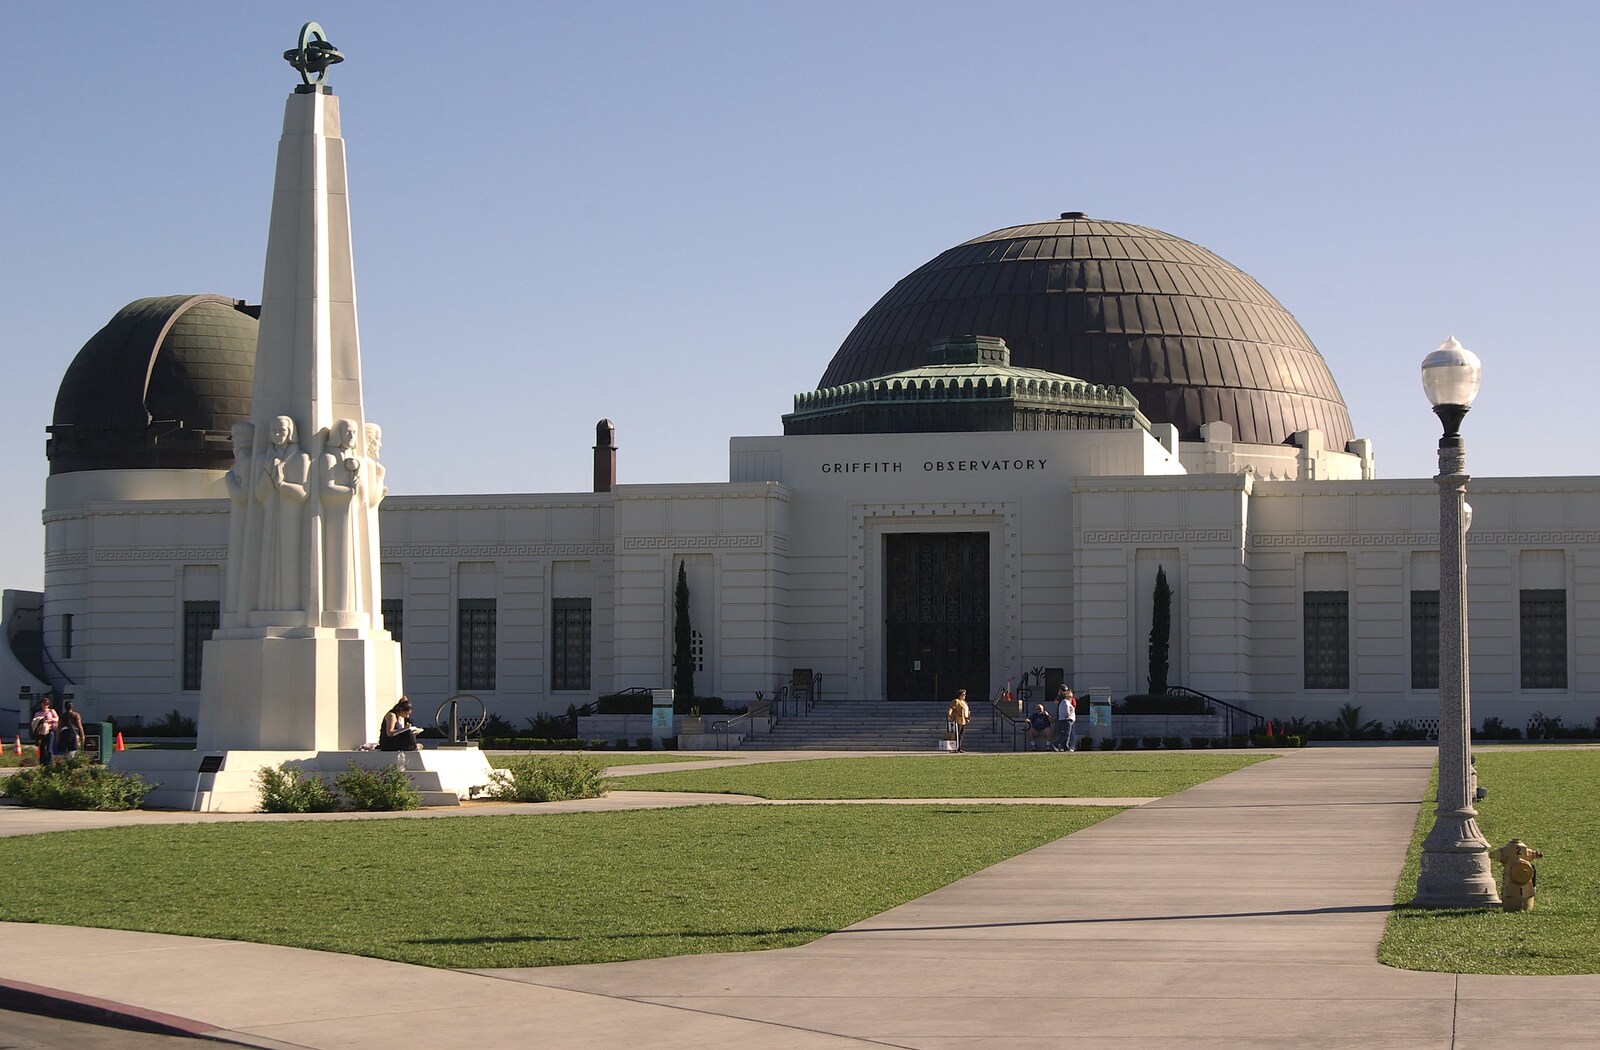 San Diego and Hollywood, California, US - 3rd March 2008: The Griffith Observatory